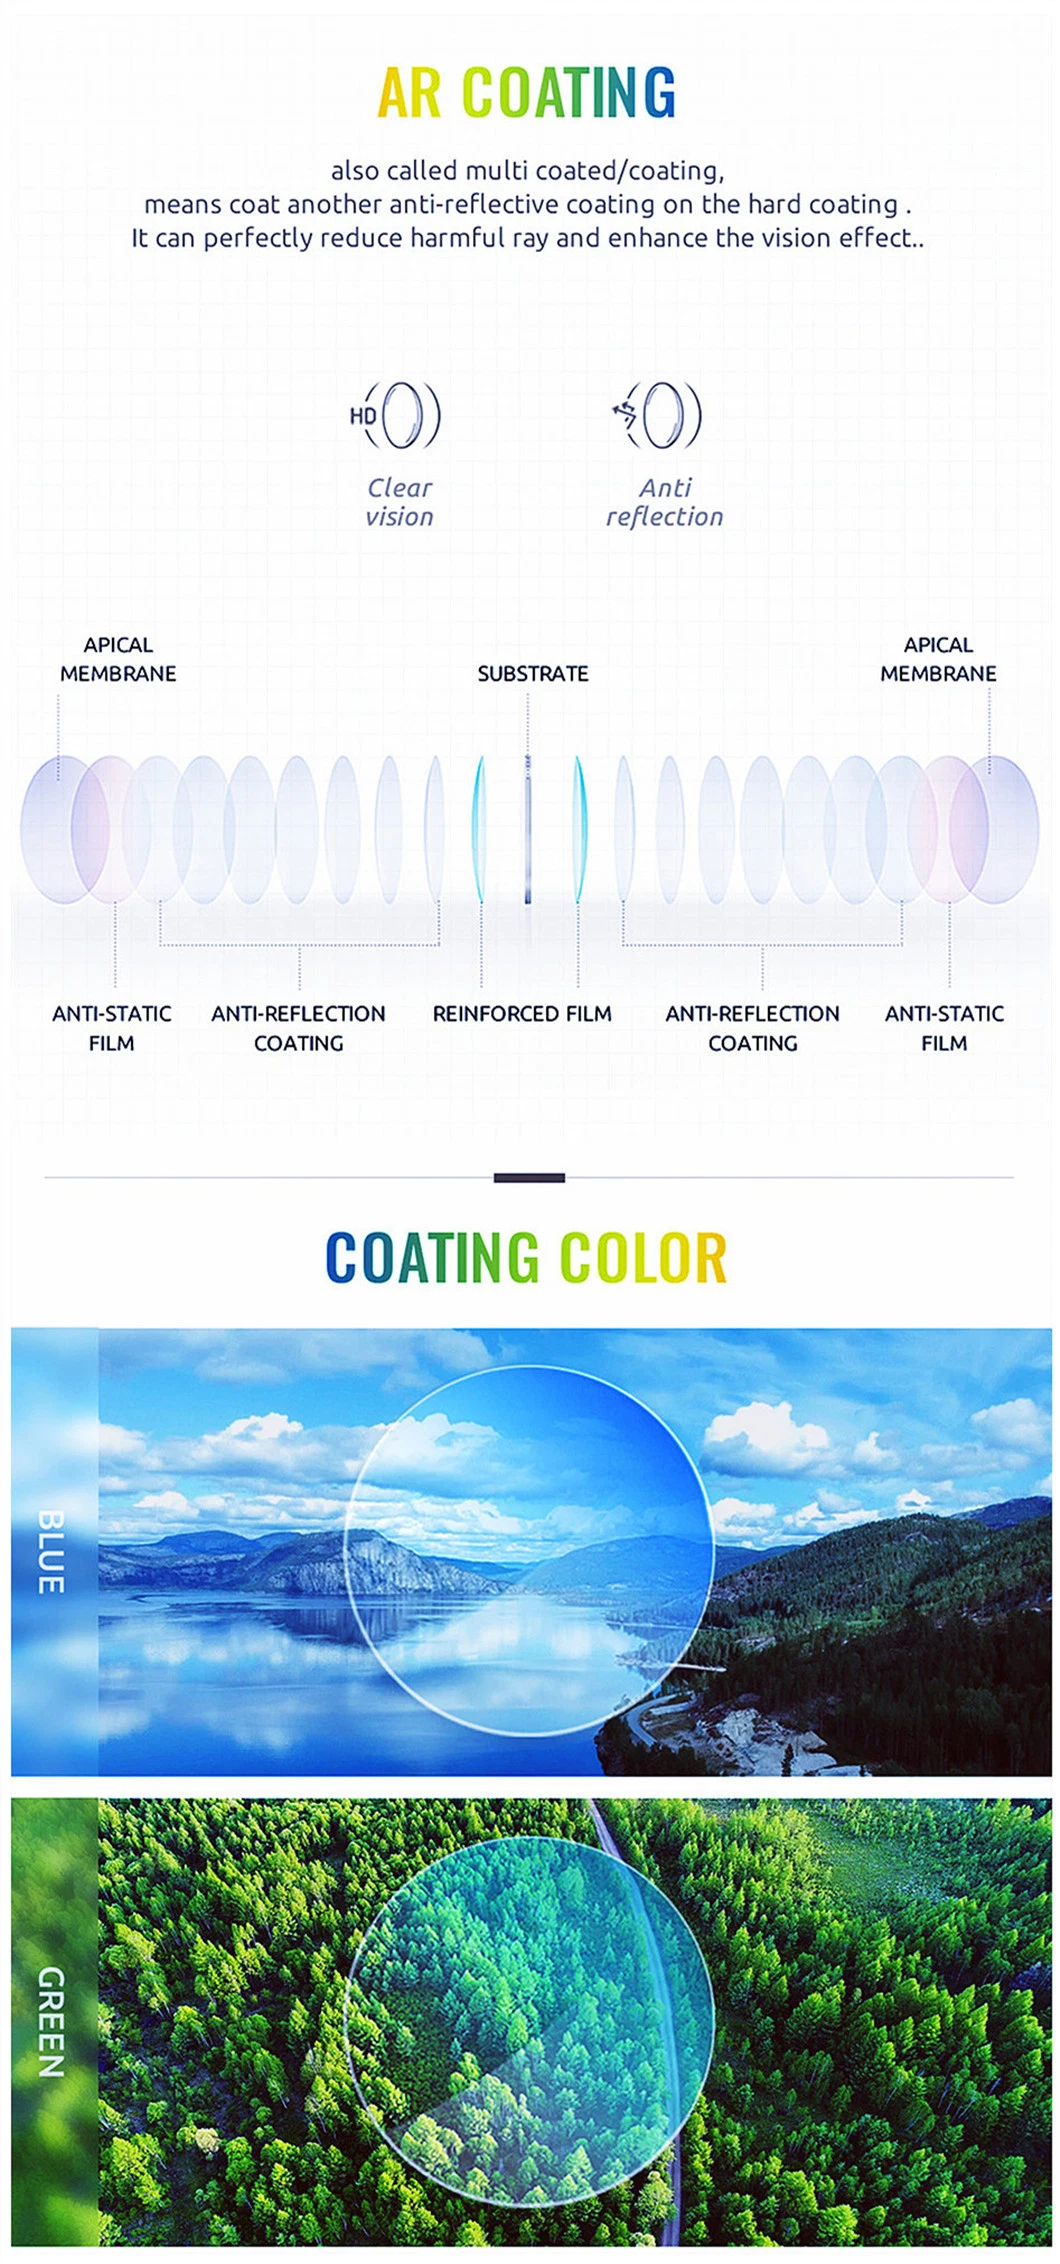 Fashionable and Practical 1.59 Photochromic Polycarbonate Transition Single Vision Lenses